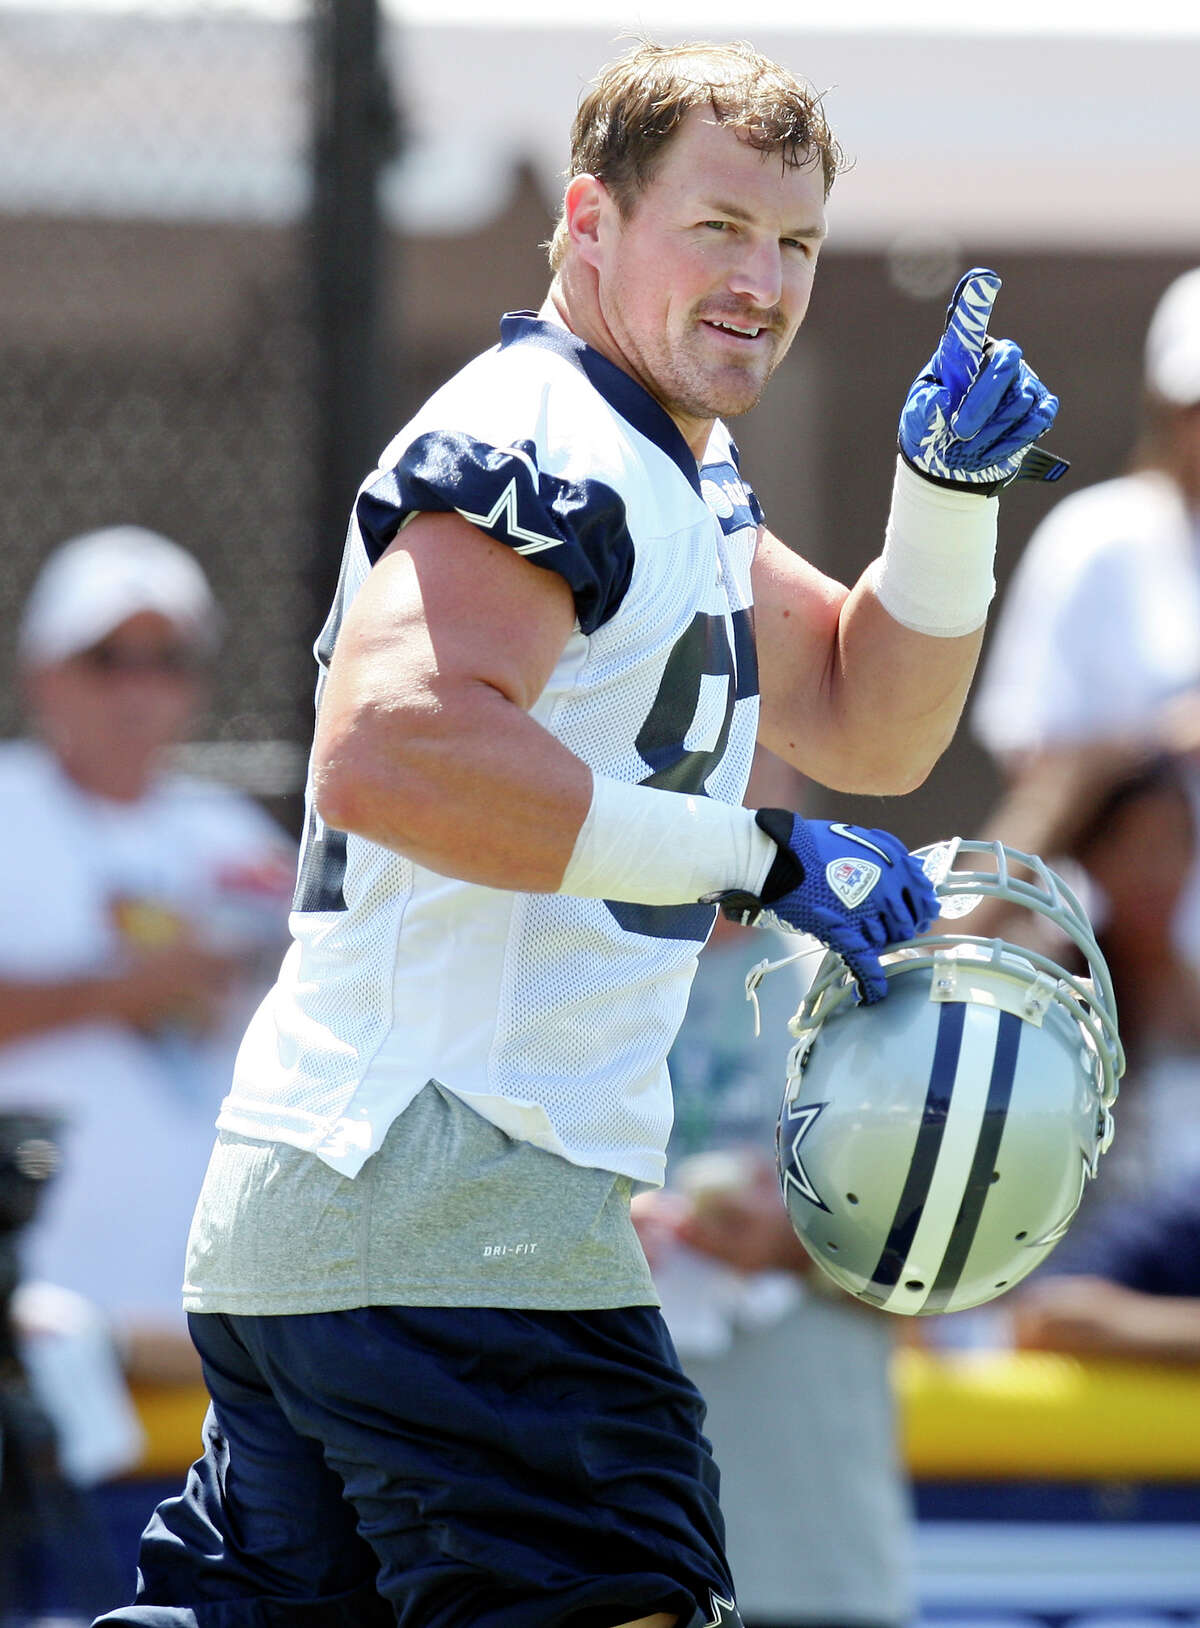 Dallas Cowboys tight end Jason Witten points at fans during the first day of their 2012 training camp held Monday July 30, 2012 in Oxnard, CA.